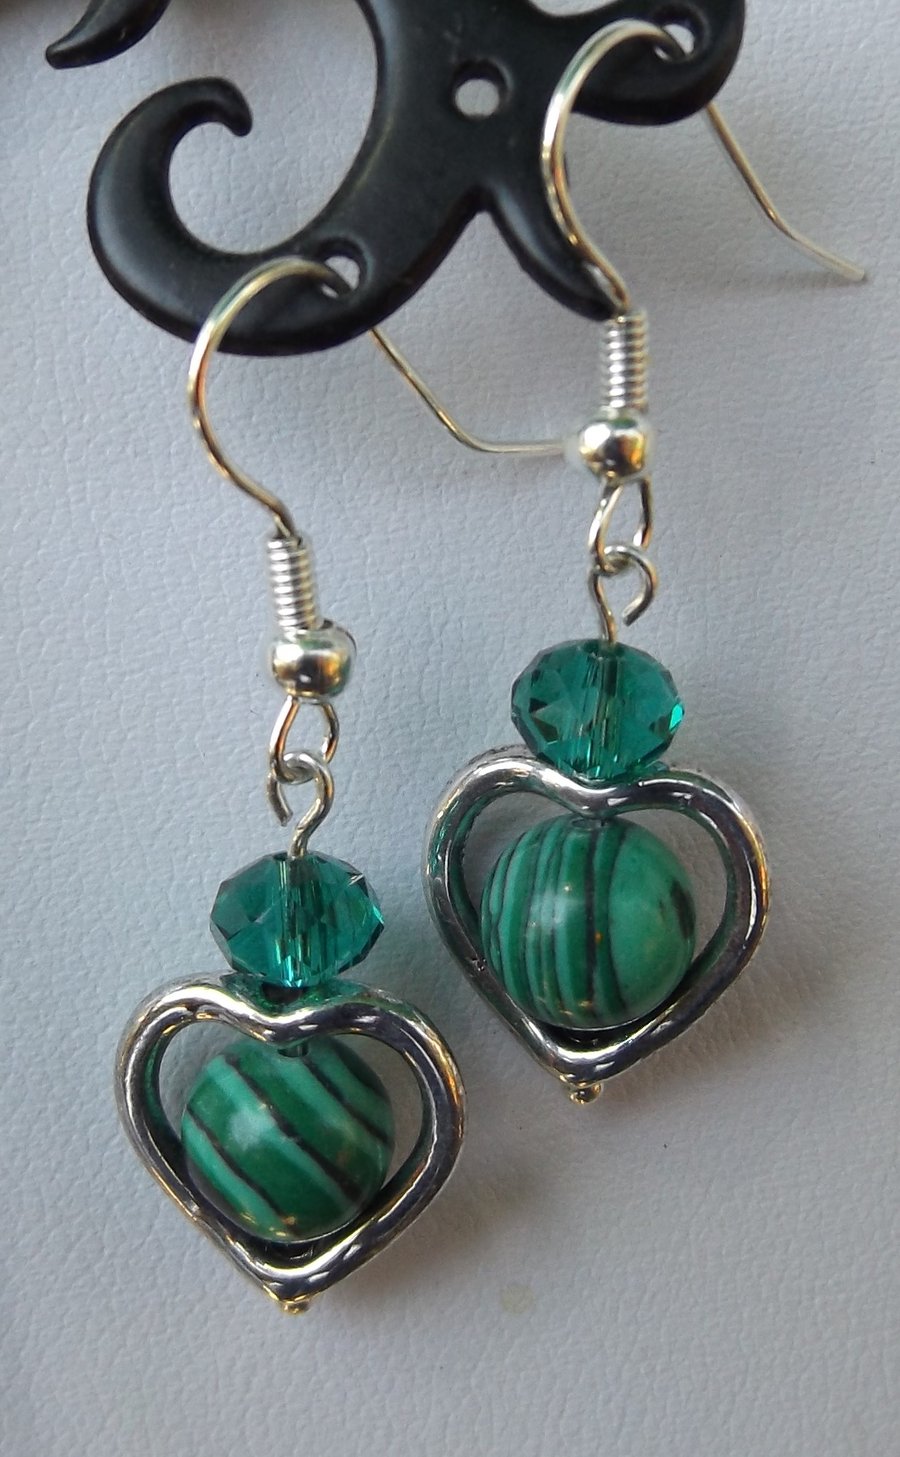 Heart charm dangle earrings with malachite and crystal